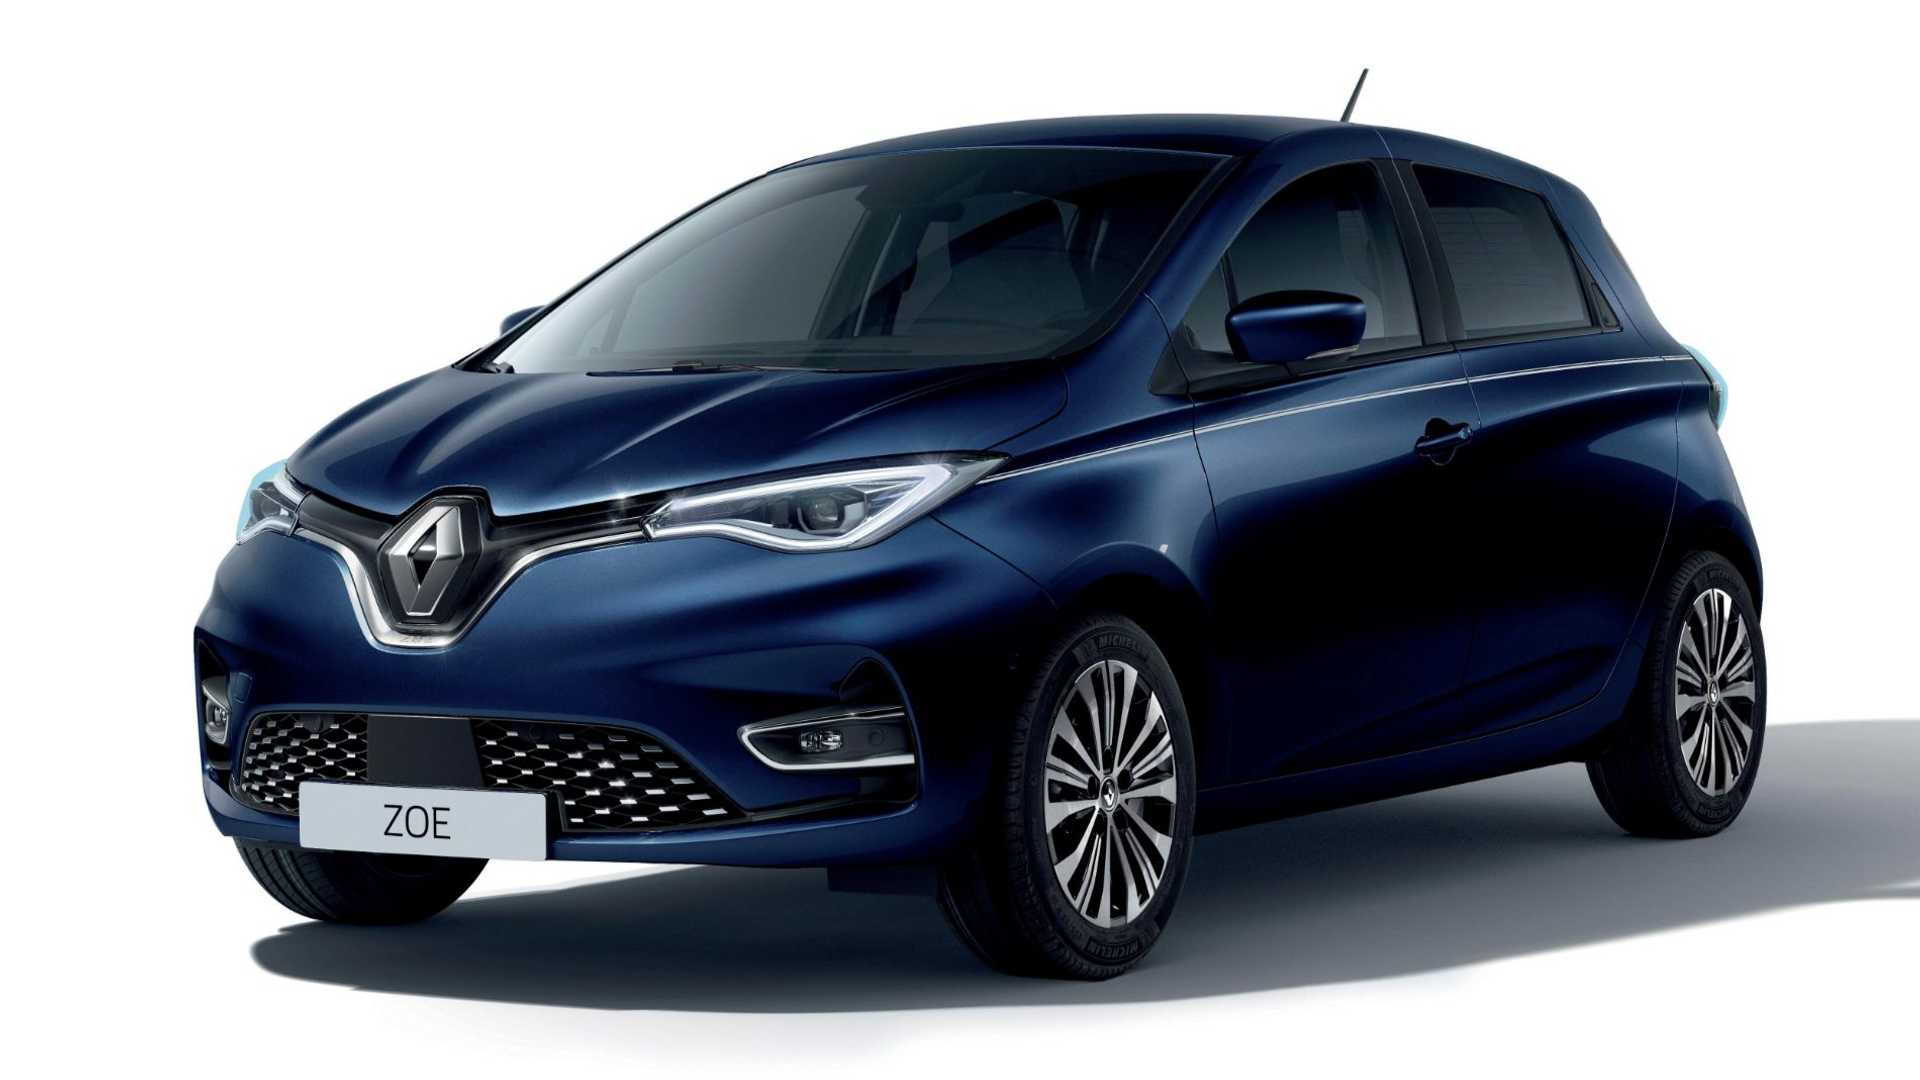 Front view of the Limited Edition Renault Zoe Riviera E-Tech